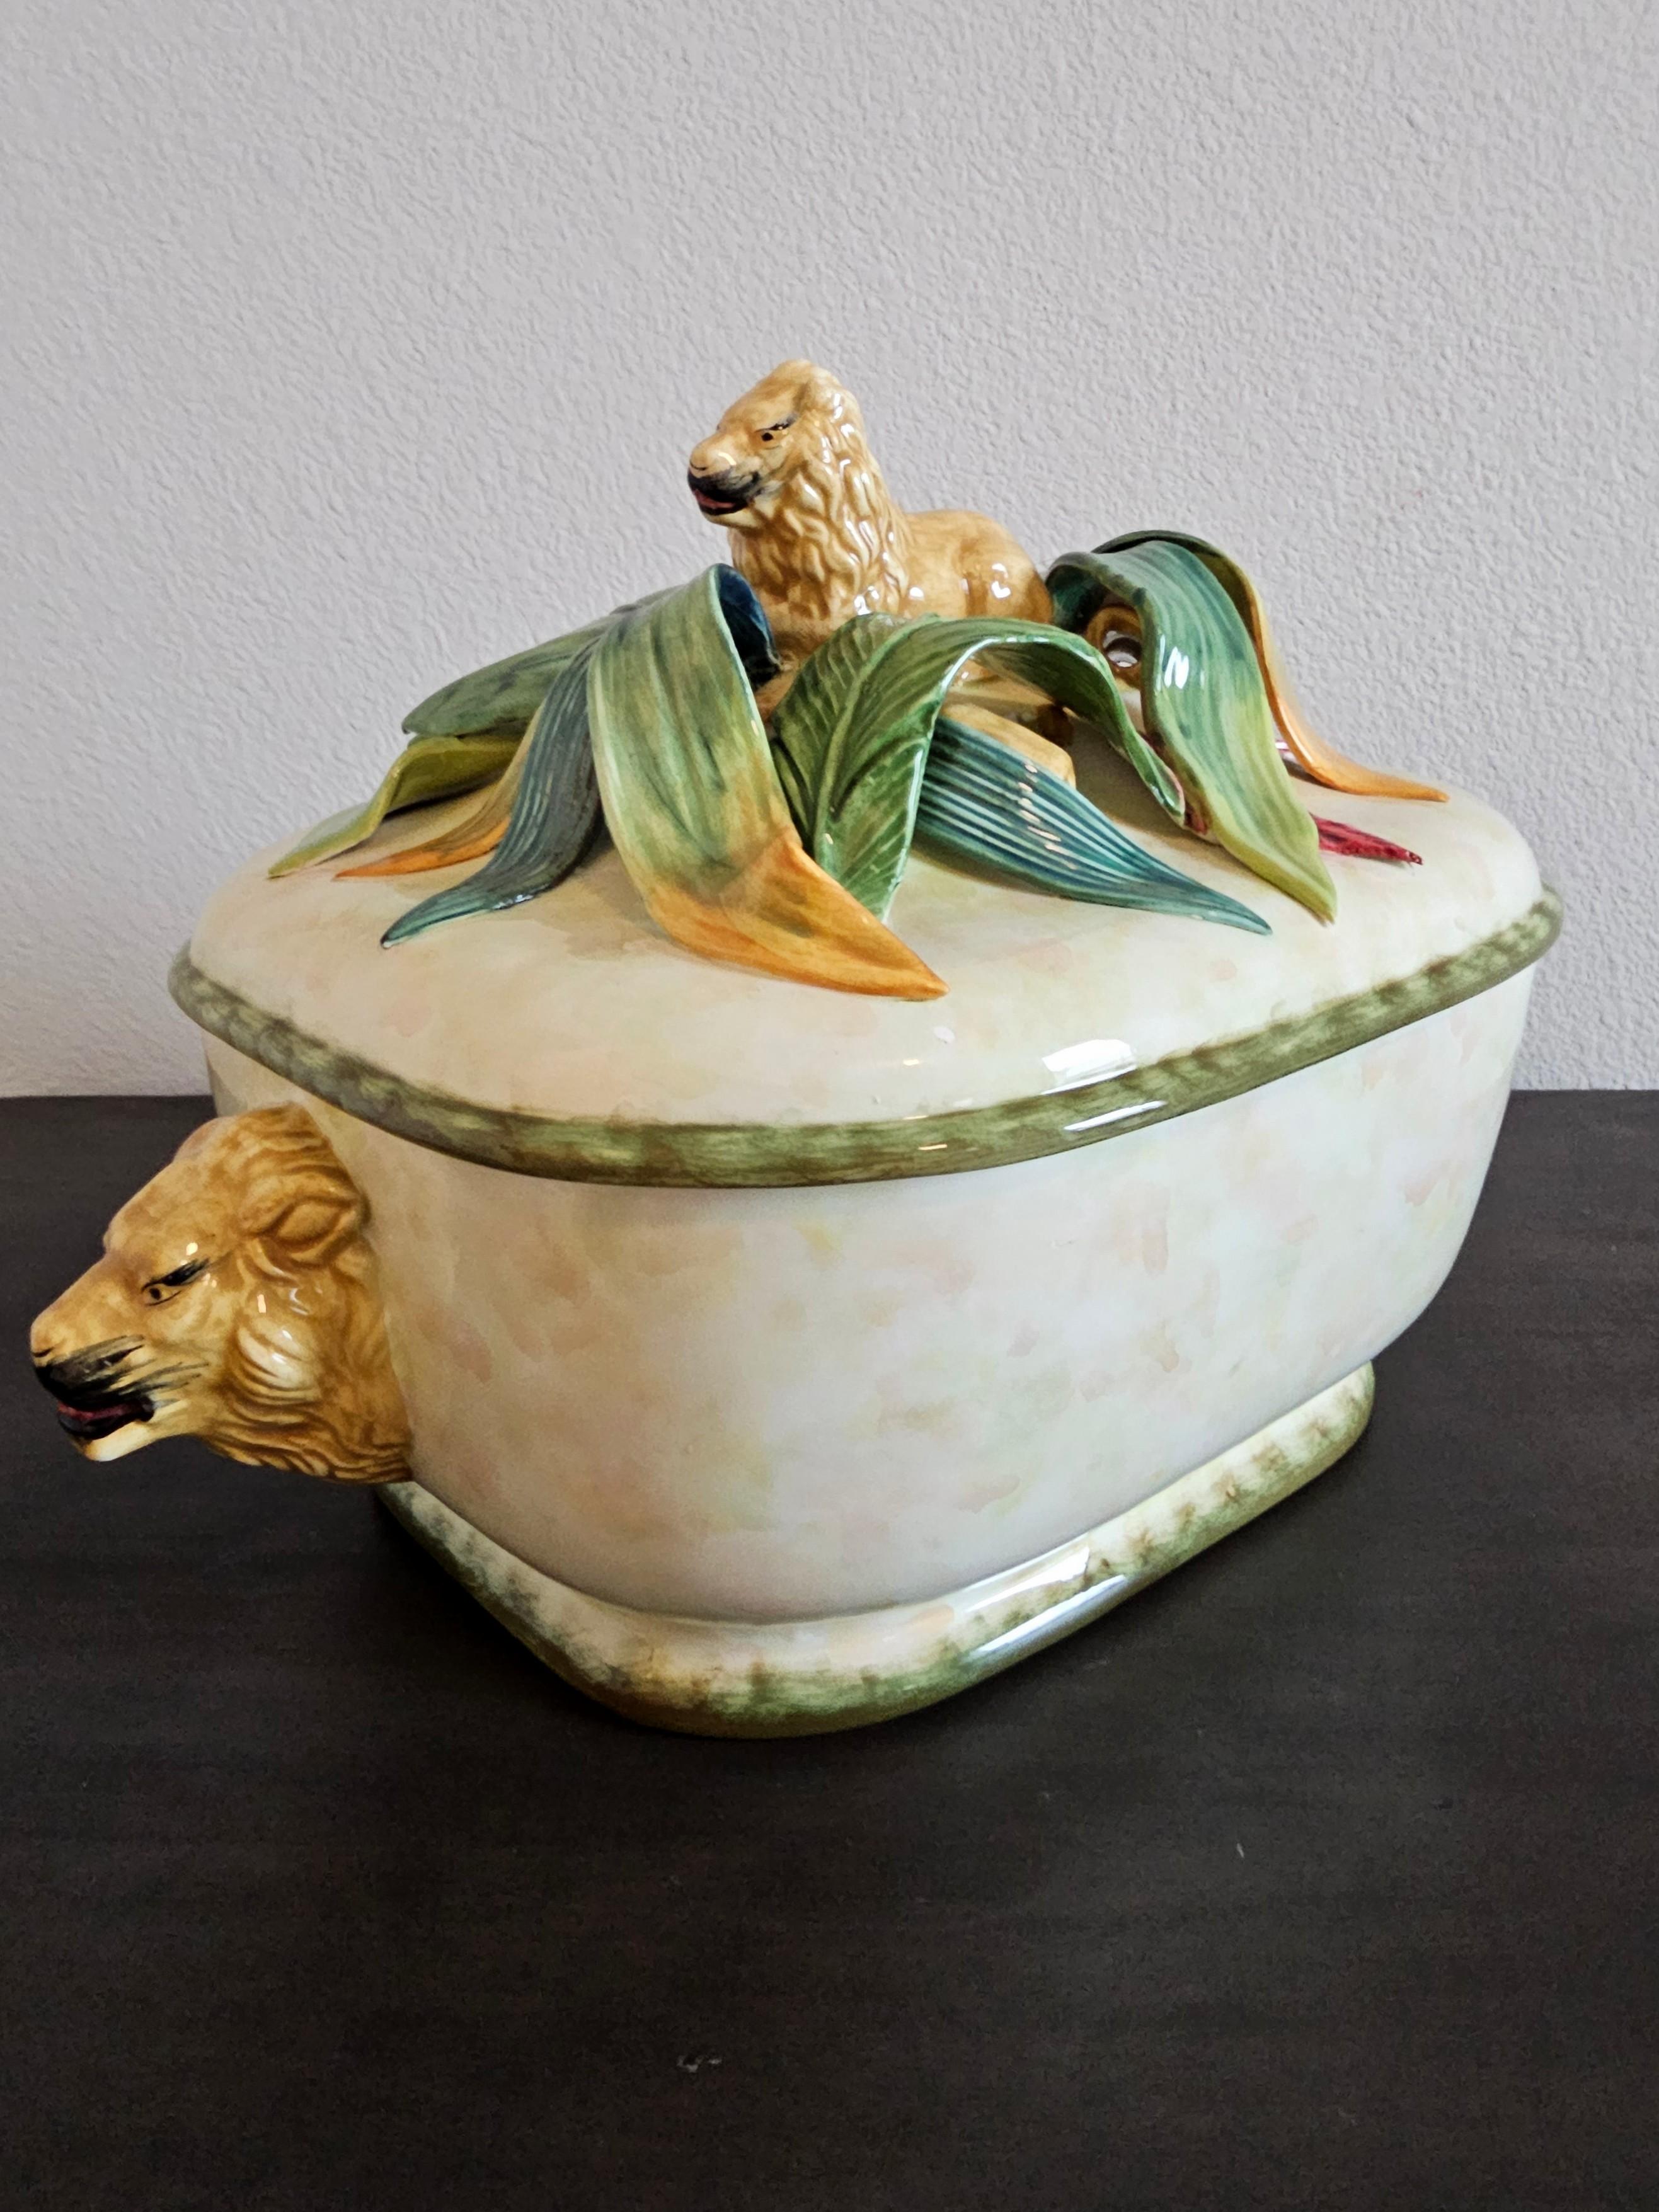 A scarce fine quality antique English Staffordshire pottery majolica tureen covered serving dish. 

Having a fitted lid surmounted with figural reclining lion finial with hand painted detailing, atop intricate polychrome glazed sculptural fiolate